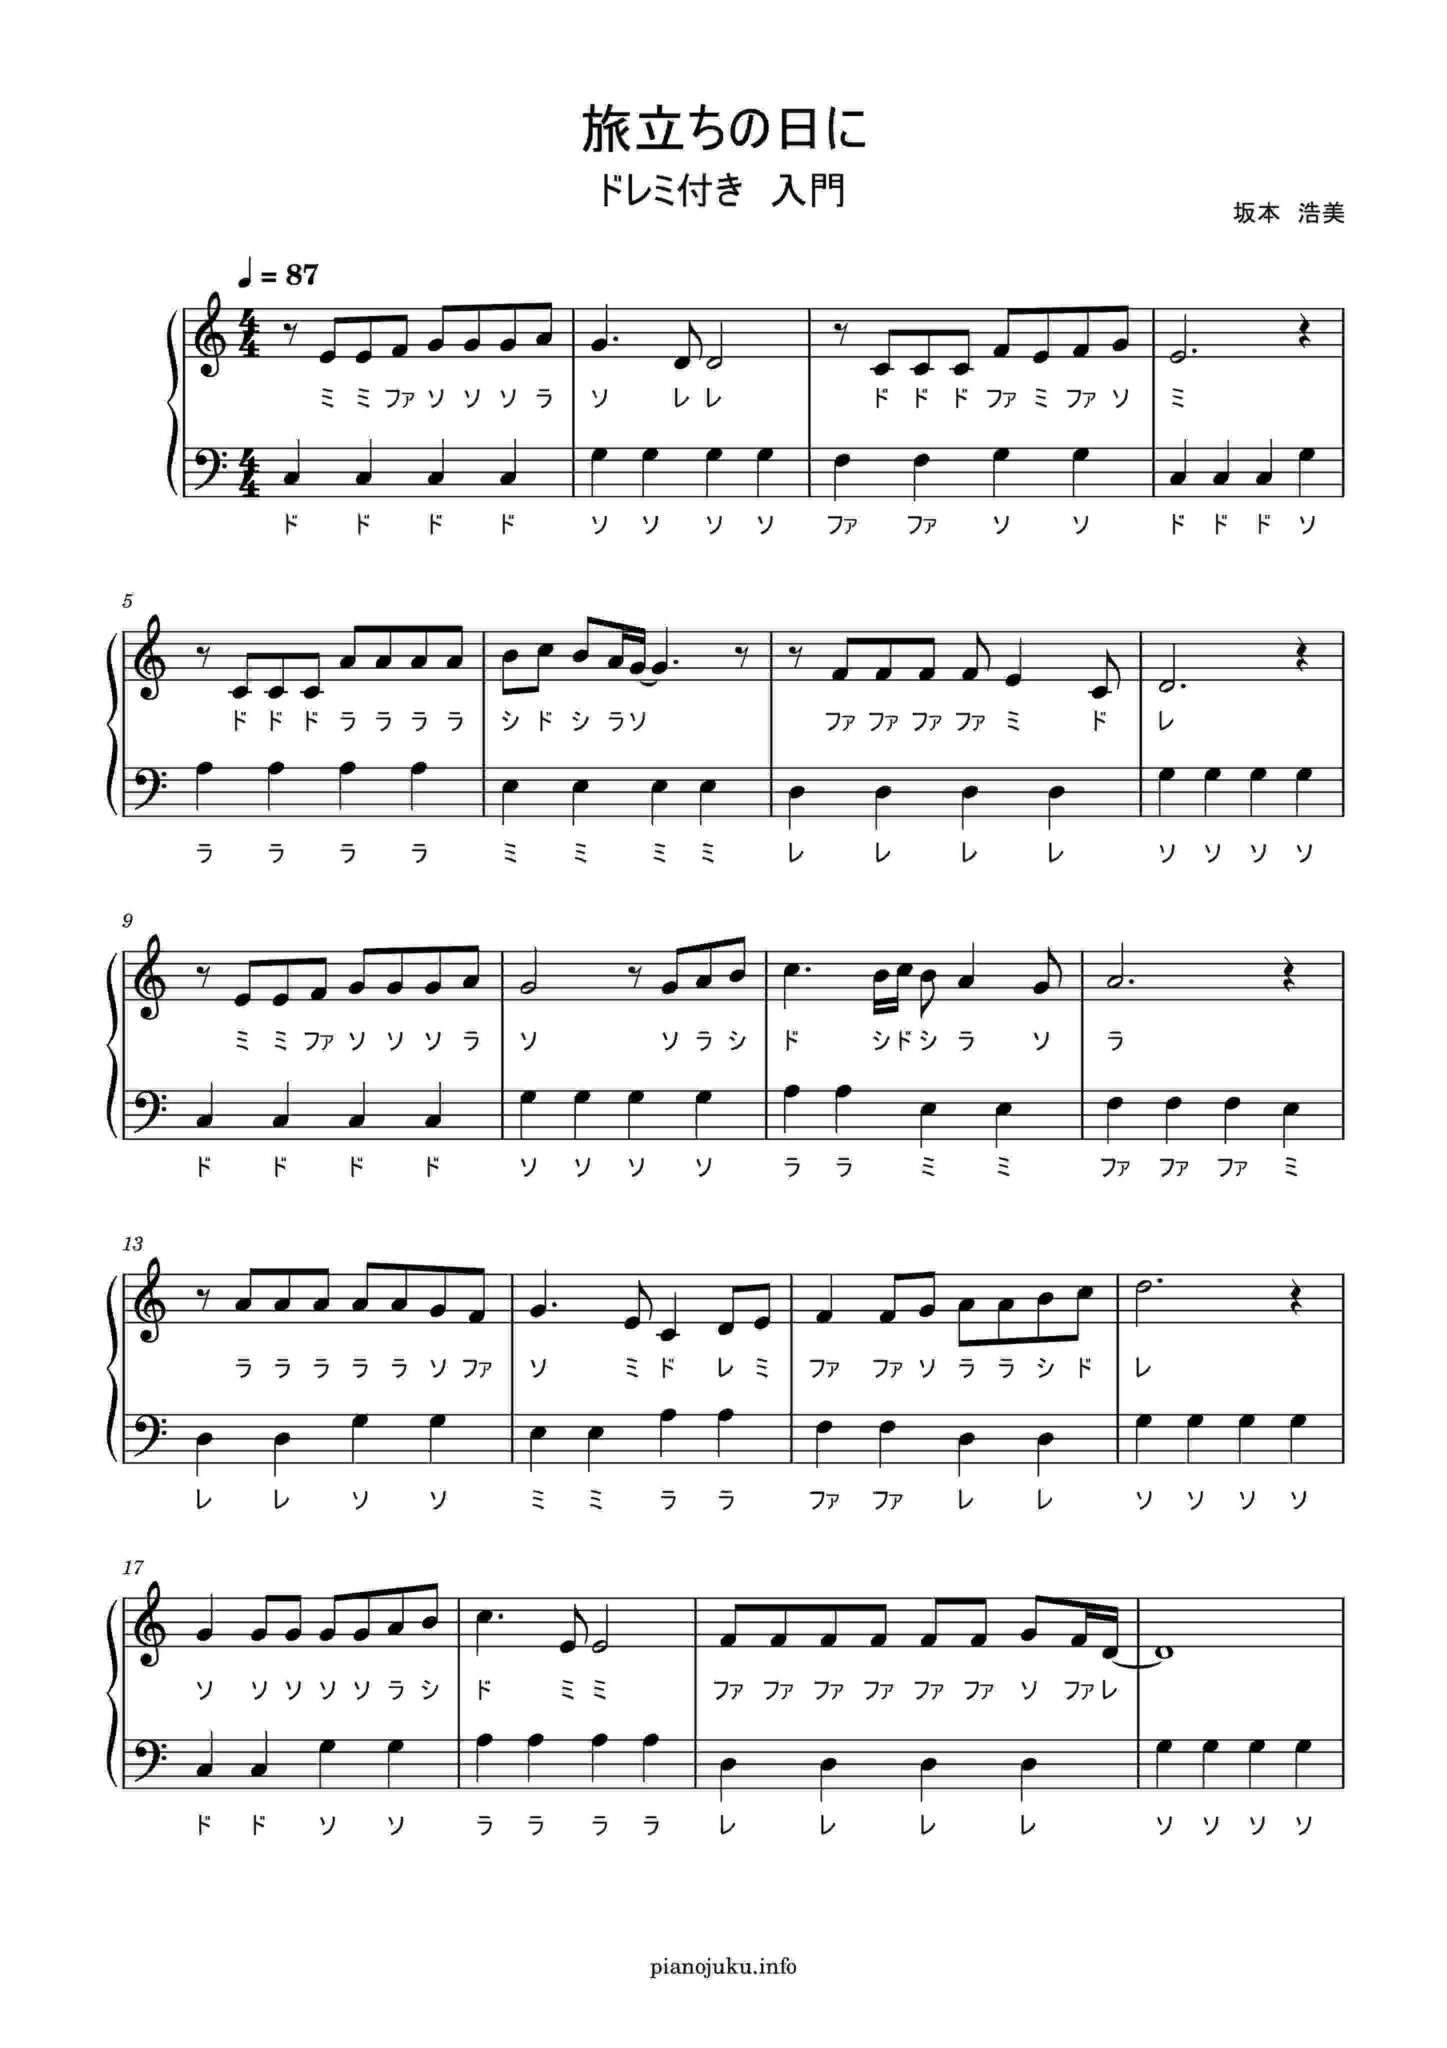 free-sheet-music-for-all-three-levels-of-difficulty-piano-school